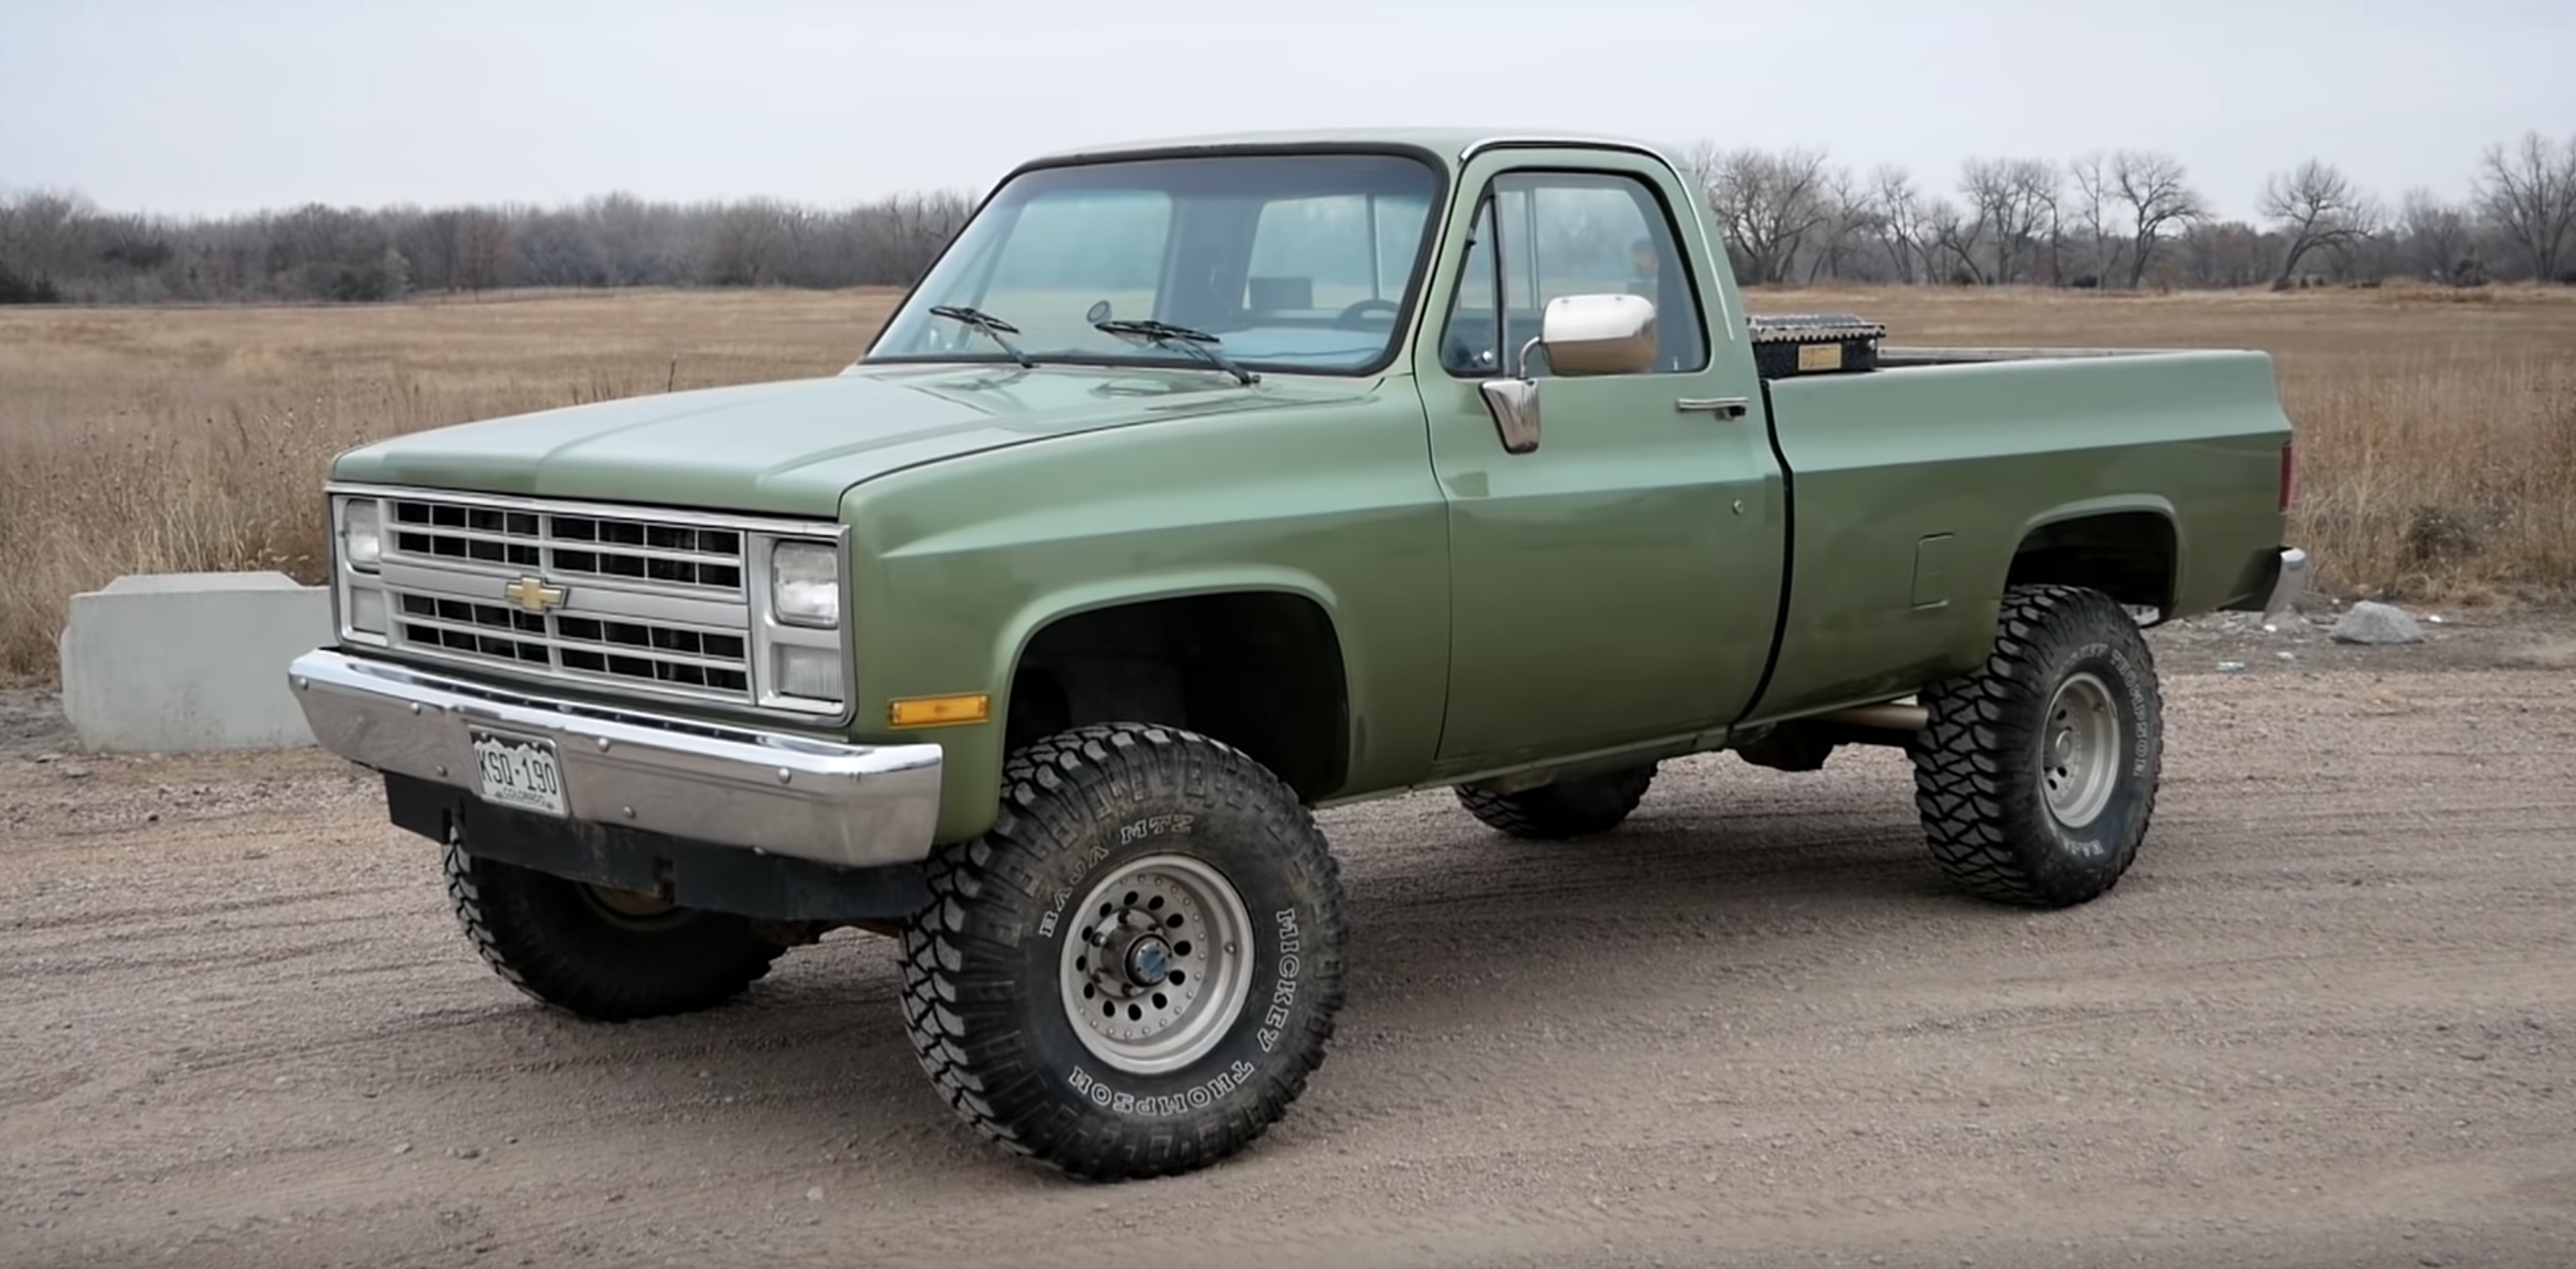 Big Green Goes North: a 1500-Mile Road Trip in a 1985 Chevy K10 (Video